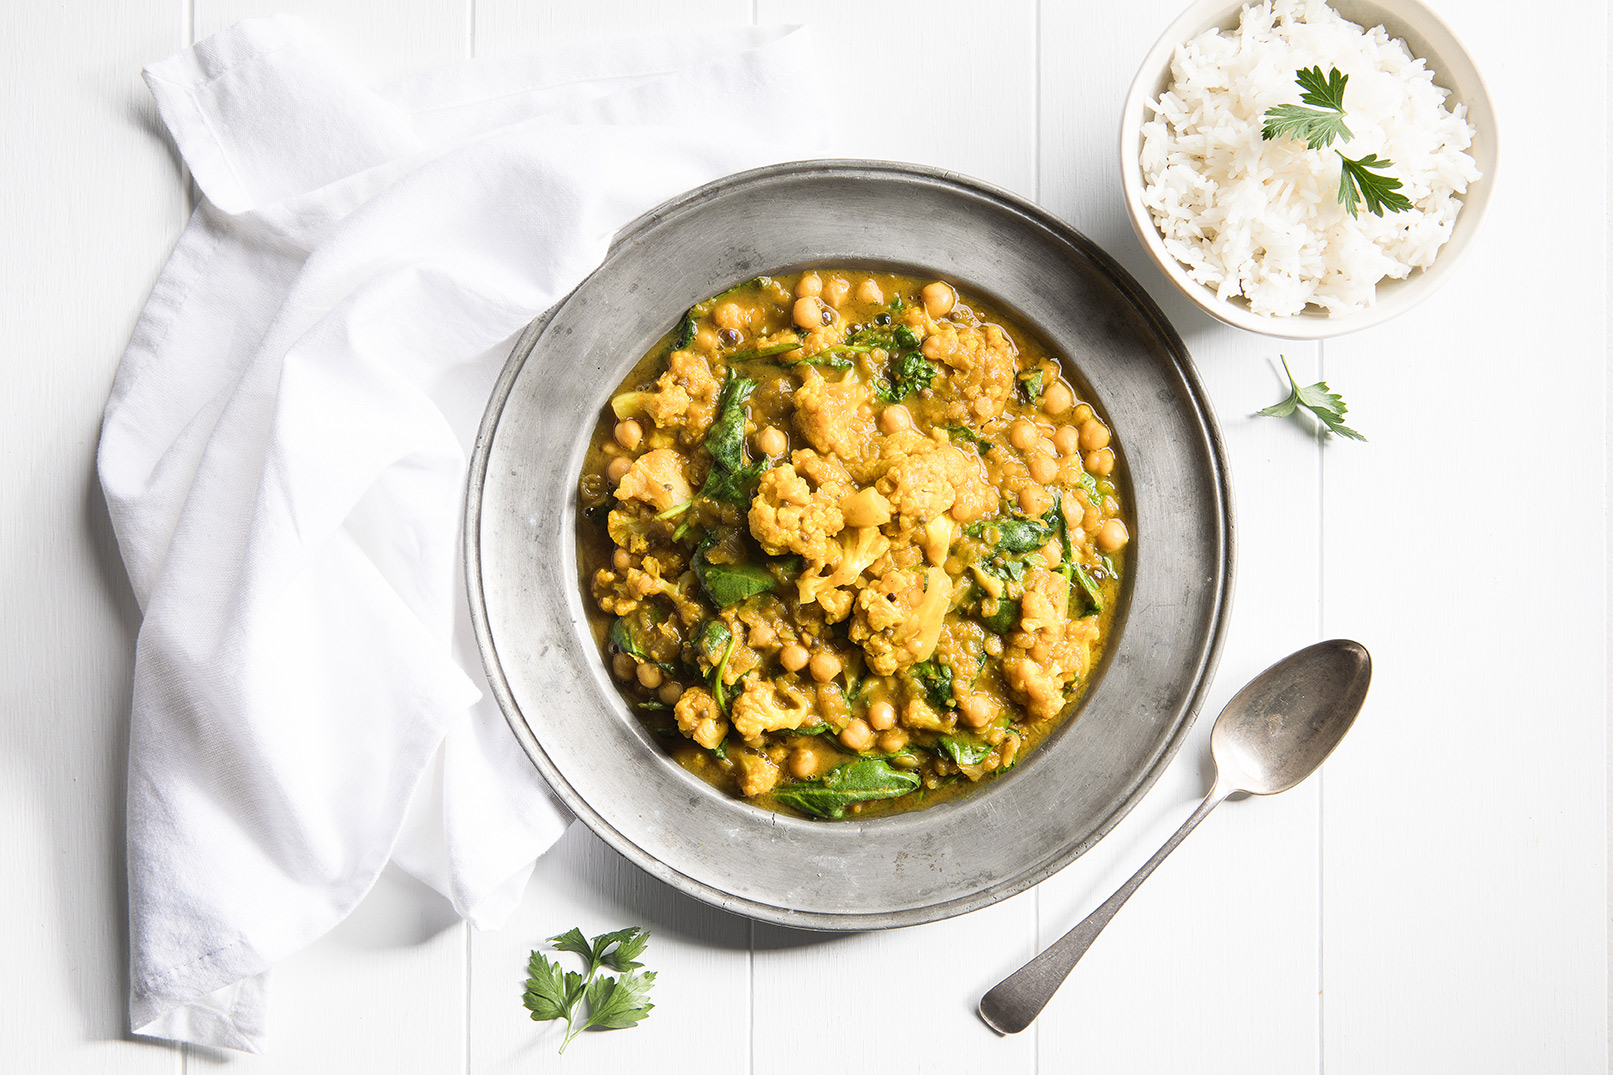 Image of cauliflower and spinach dahl in a large silver bowl with a metal spoon for serving and rice in a small white bowl on the side.